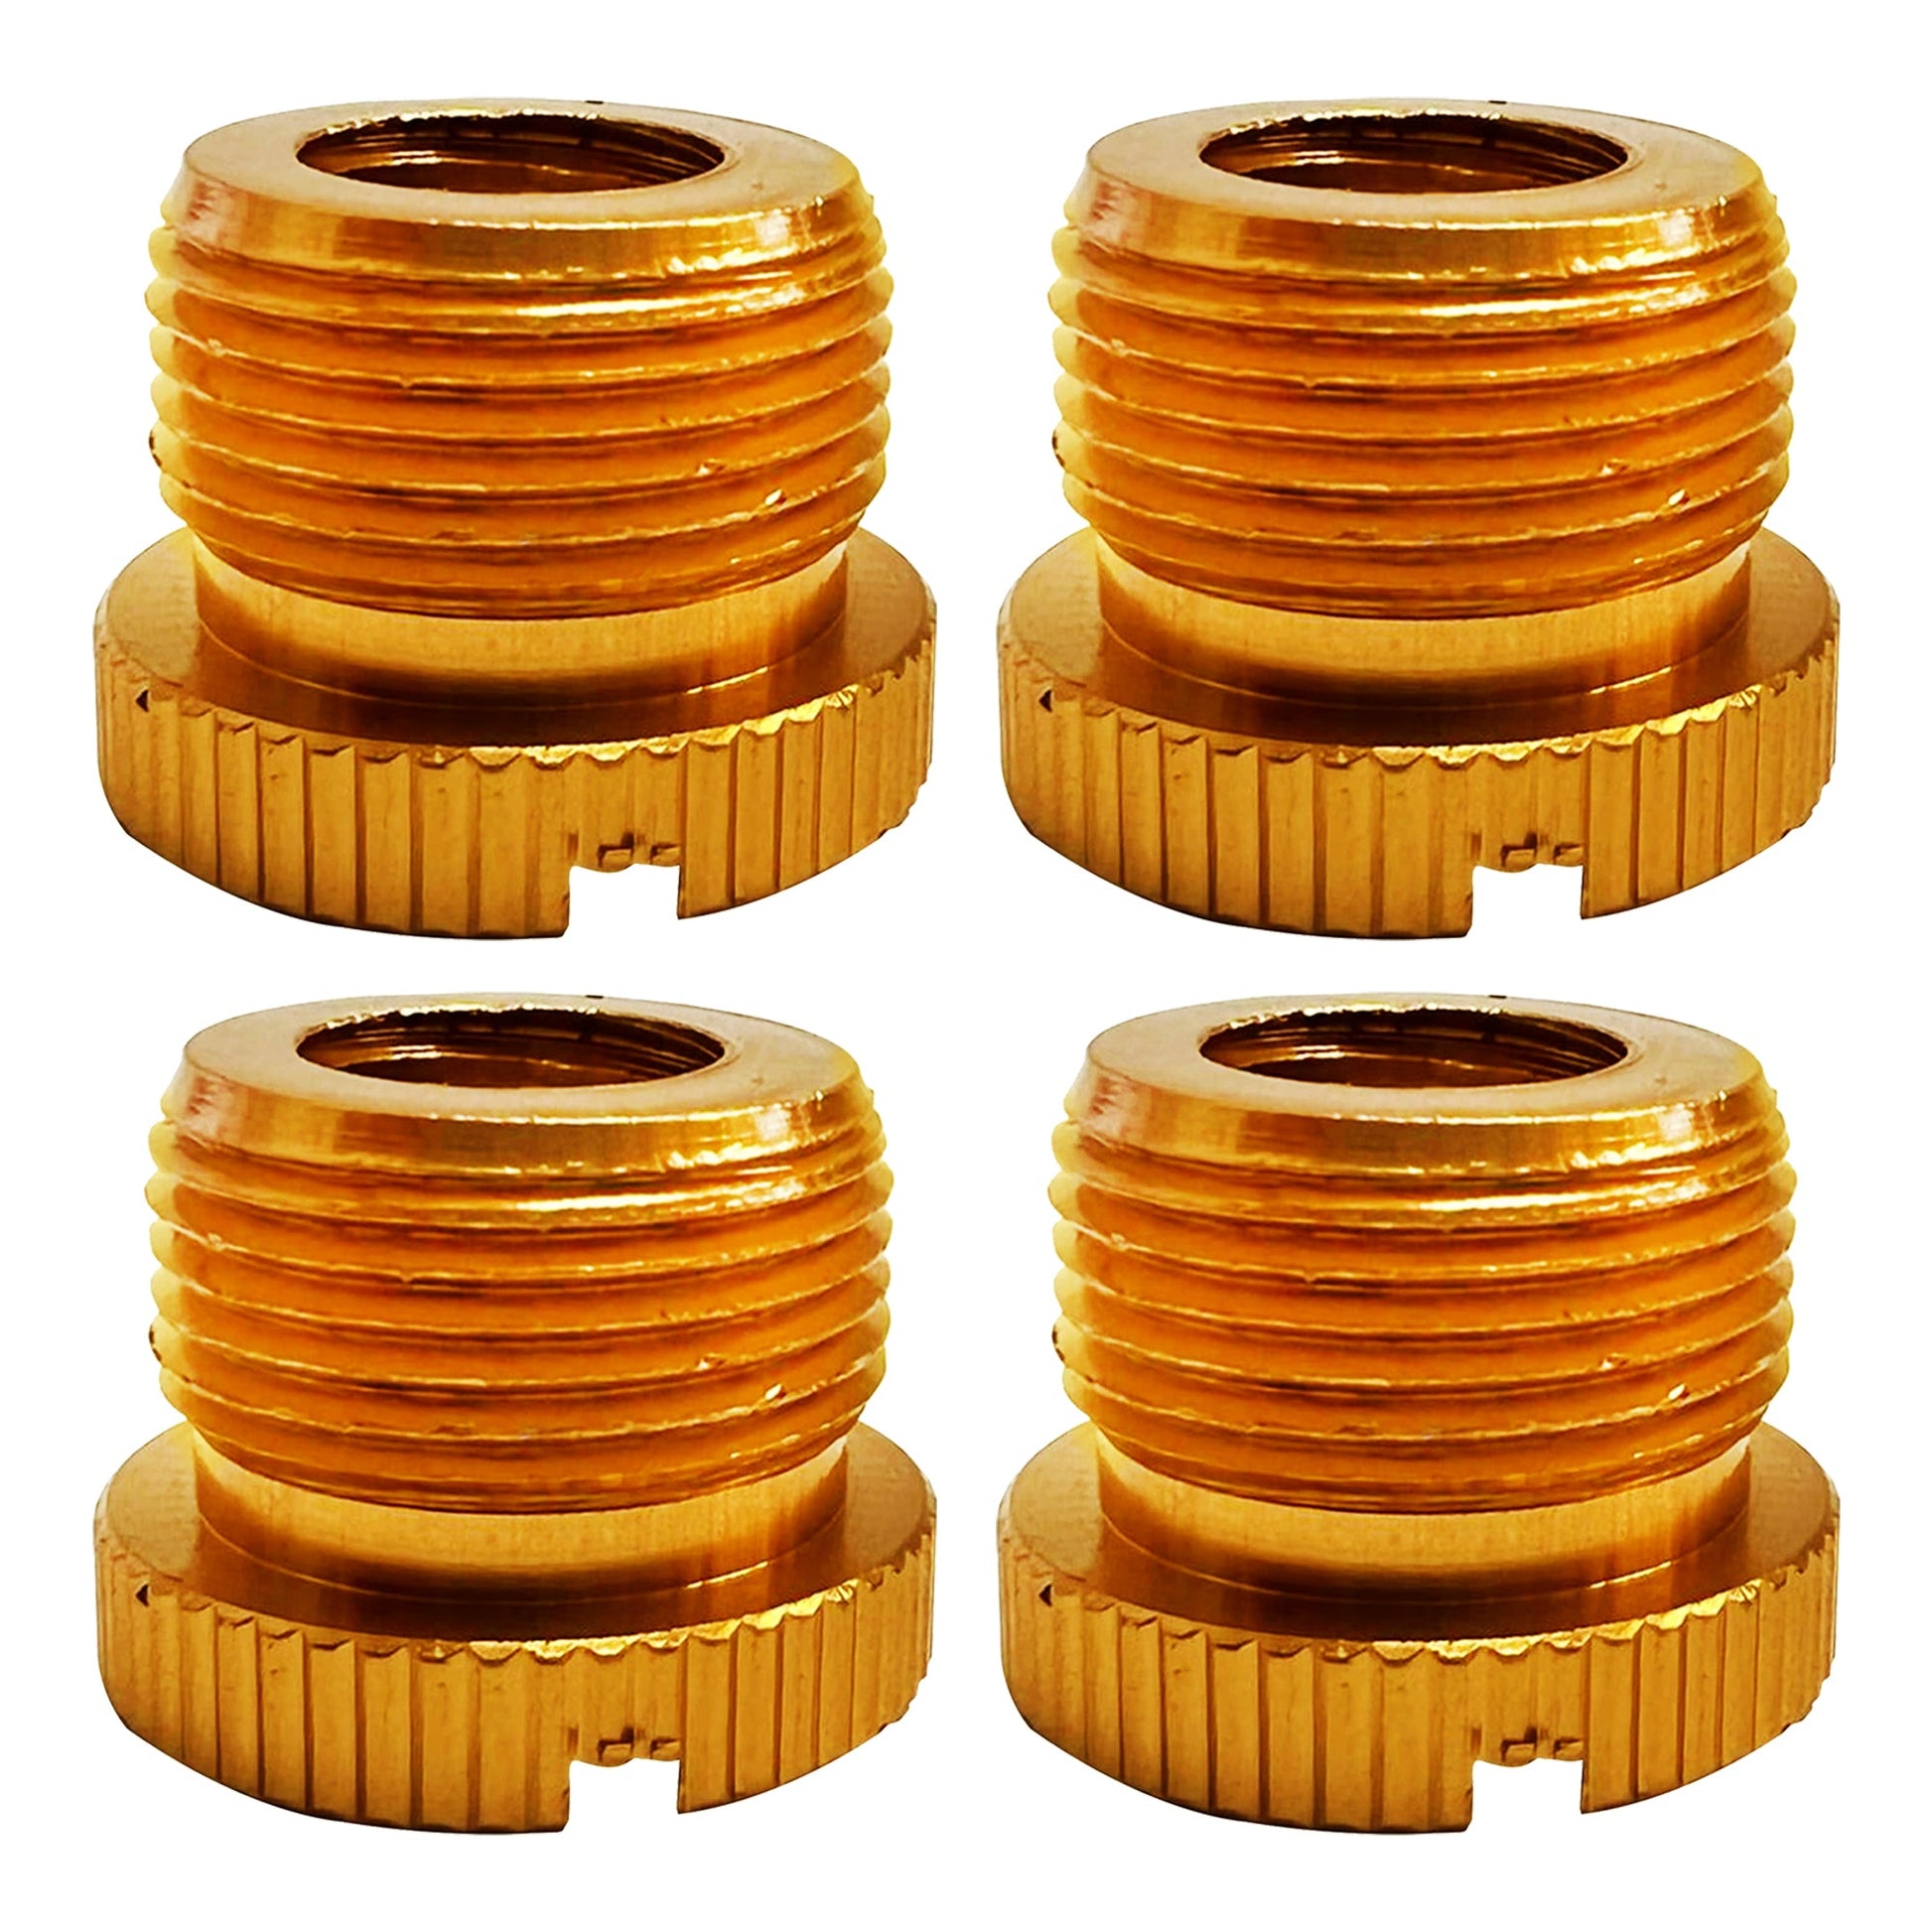 5 Core Mic Stand Adapter 4 Pieces Gold 3/8 Female to 5/8 Male Aluminum Mic Screw Adapter Gold Microphone Tripod Stand Screw - MS ADP M GLD 4PCS-0